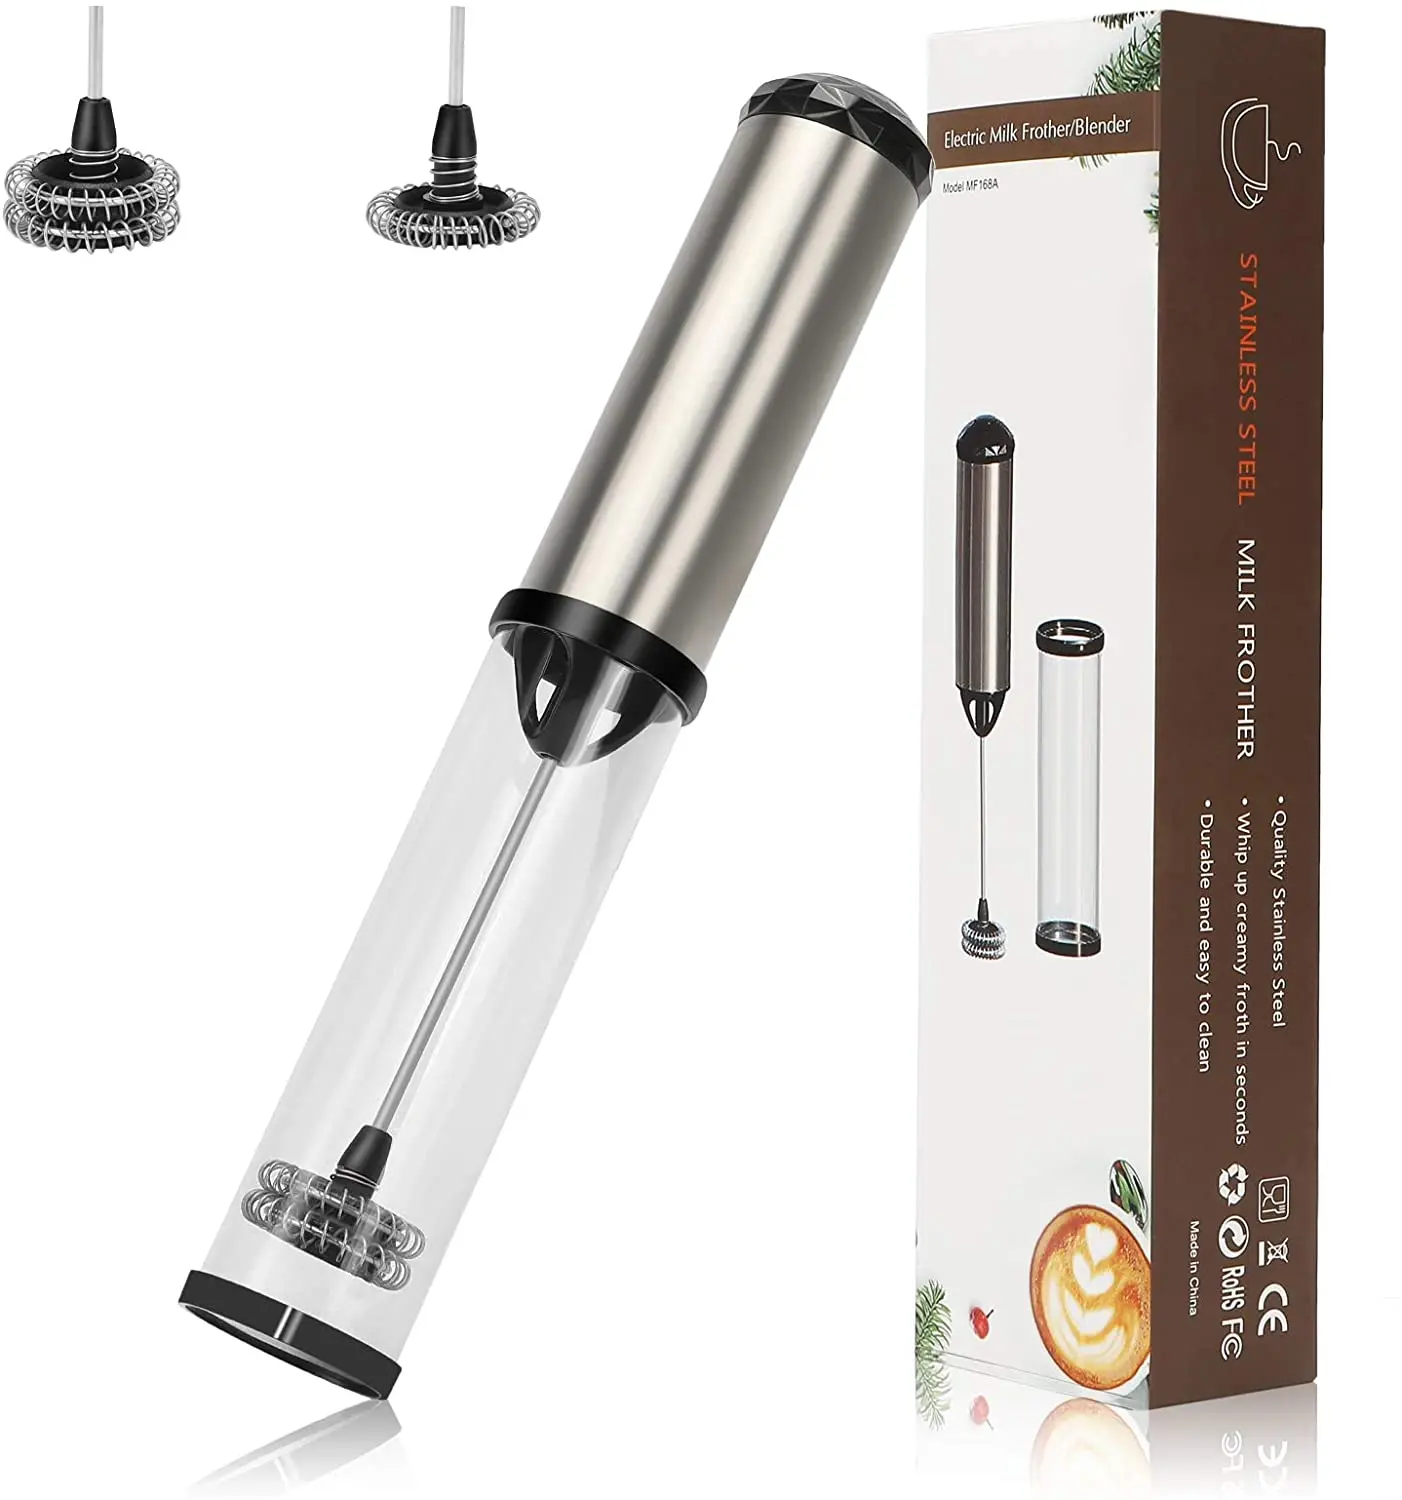 

High quality Battery operated milk frother handheld foam maker custom milk frother milk blender handheld usb frother